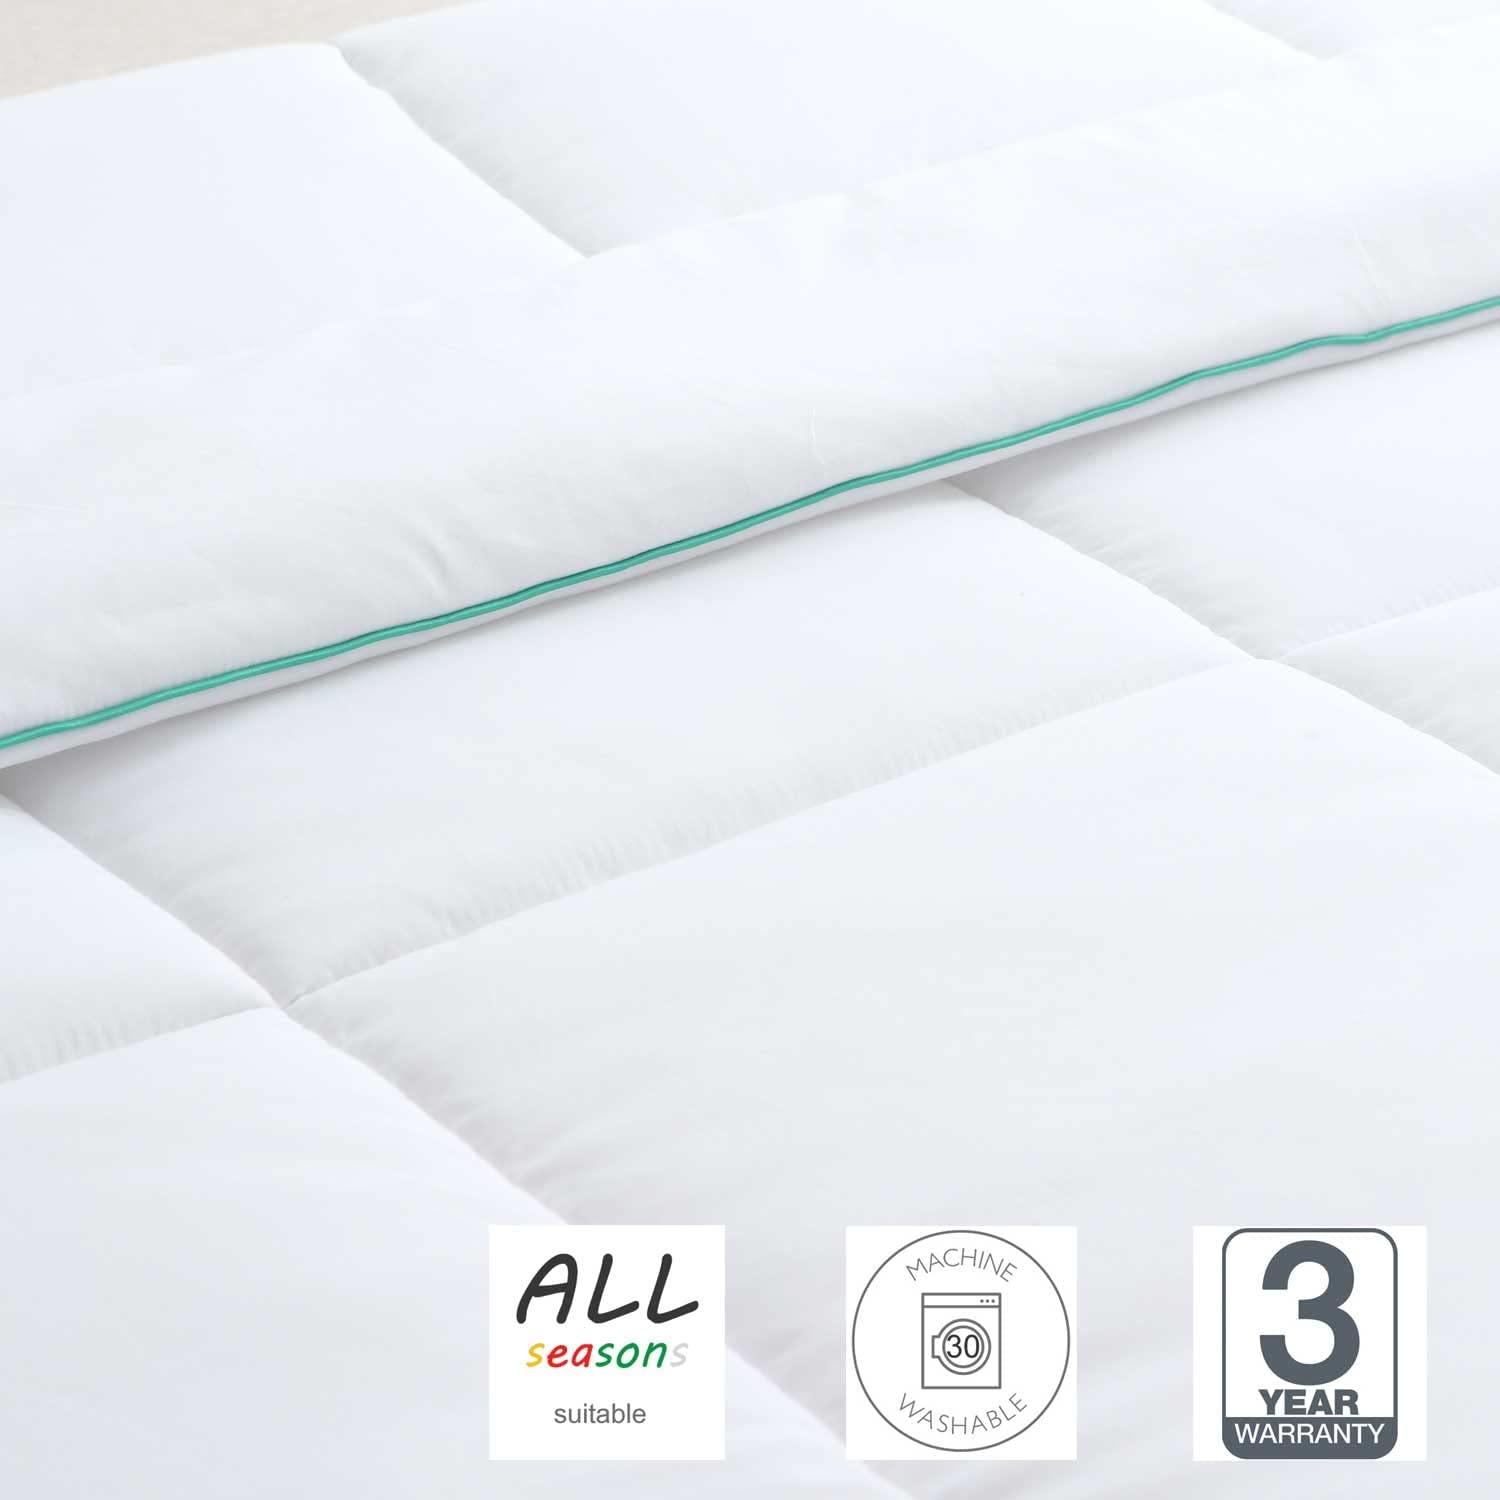 Luxton 800GSM Bamboo Quilt